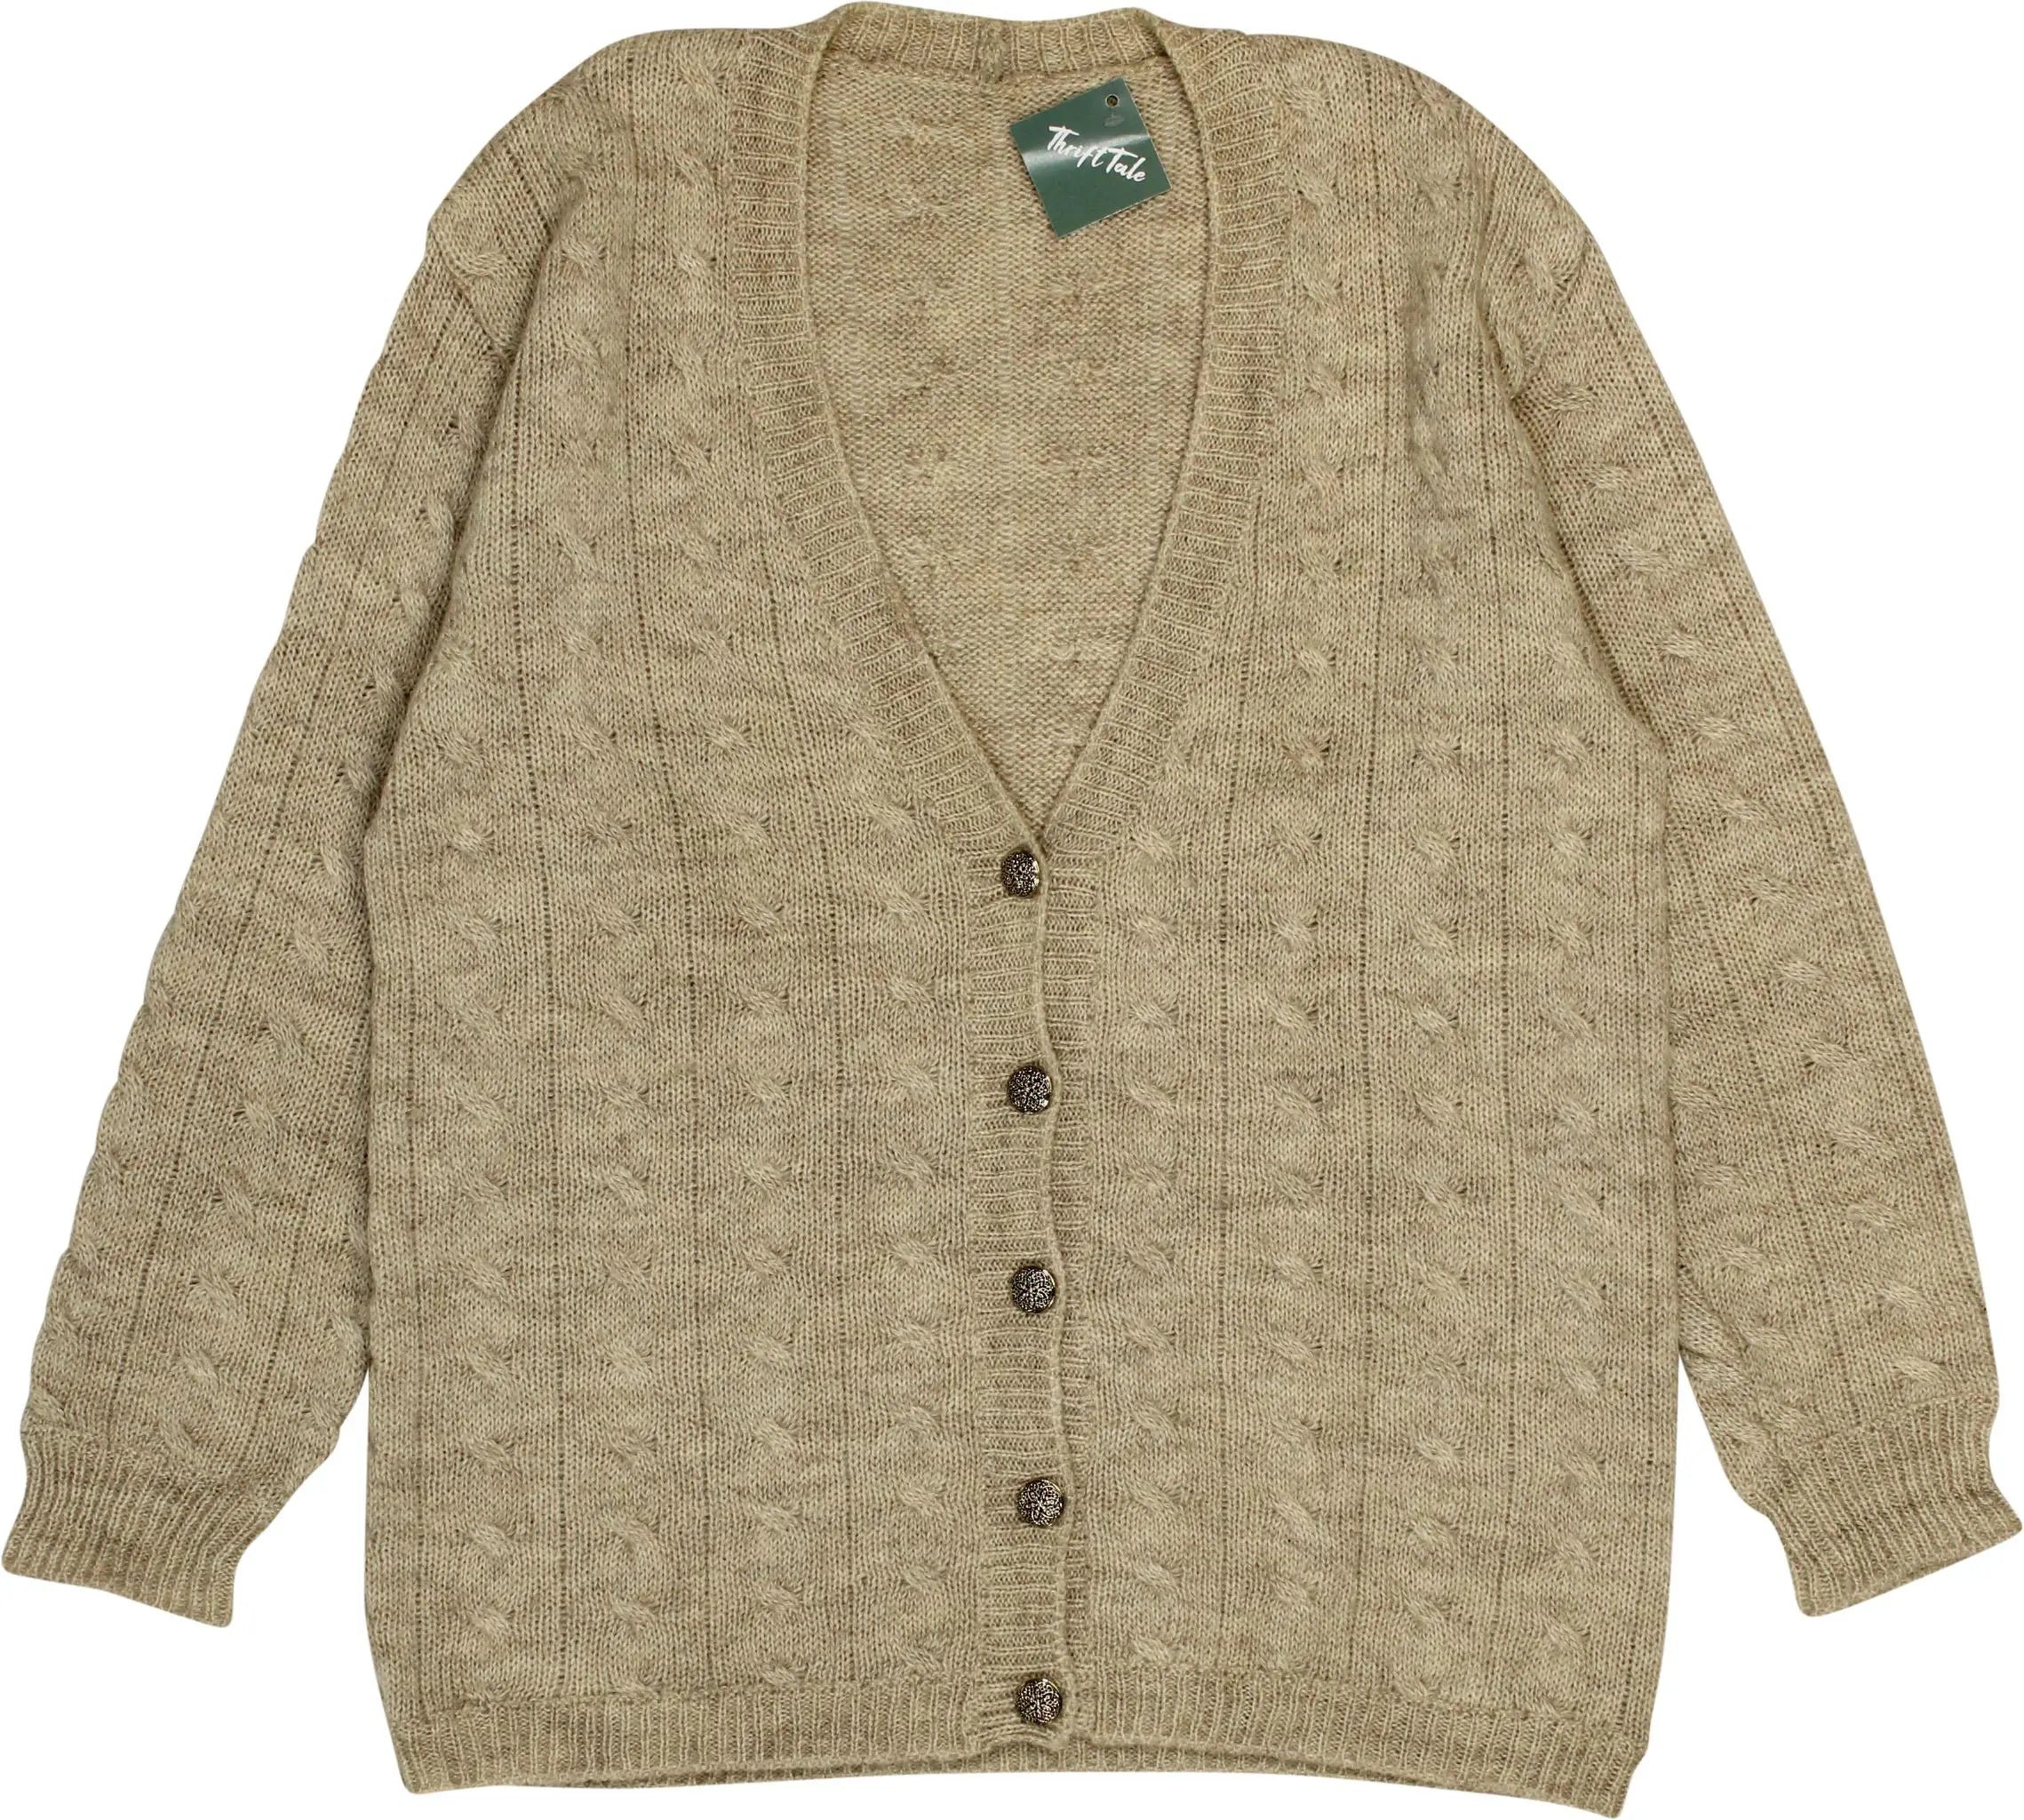 Handmade - Handmade Cable Knit Cardigan- ThriftTale.com - Vintage and second handclothing